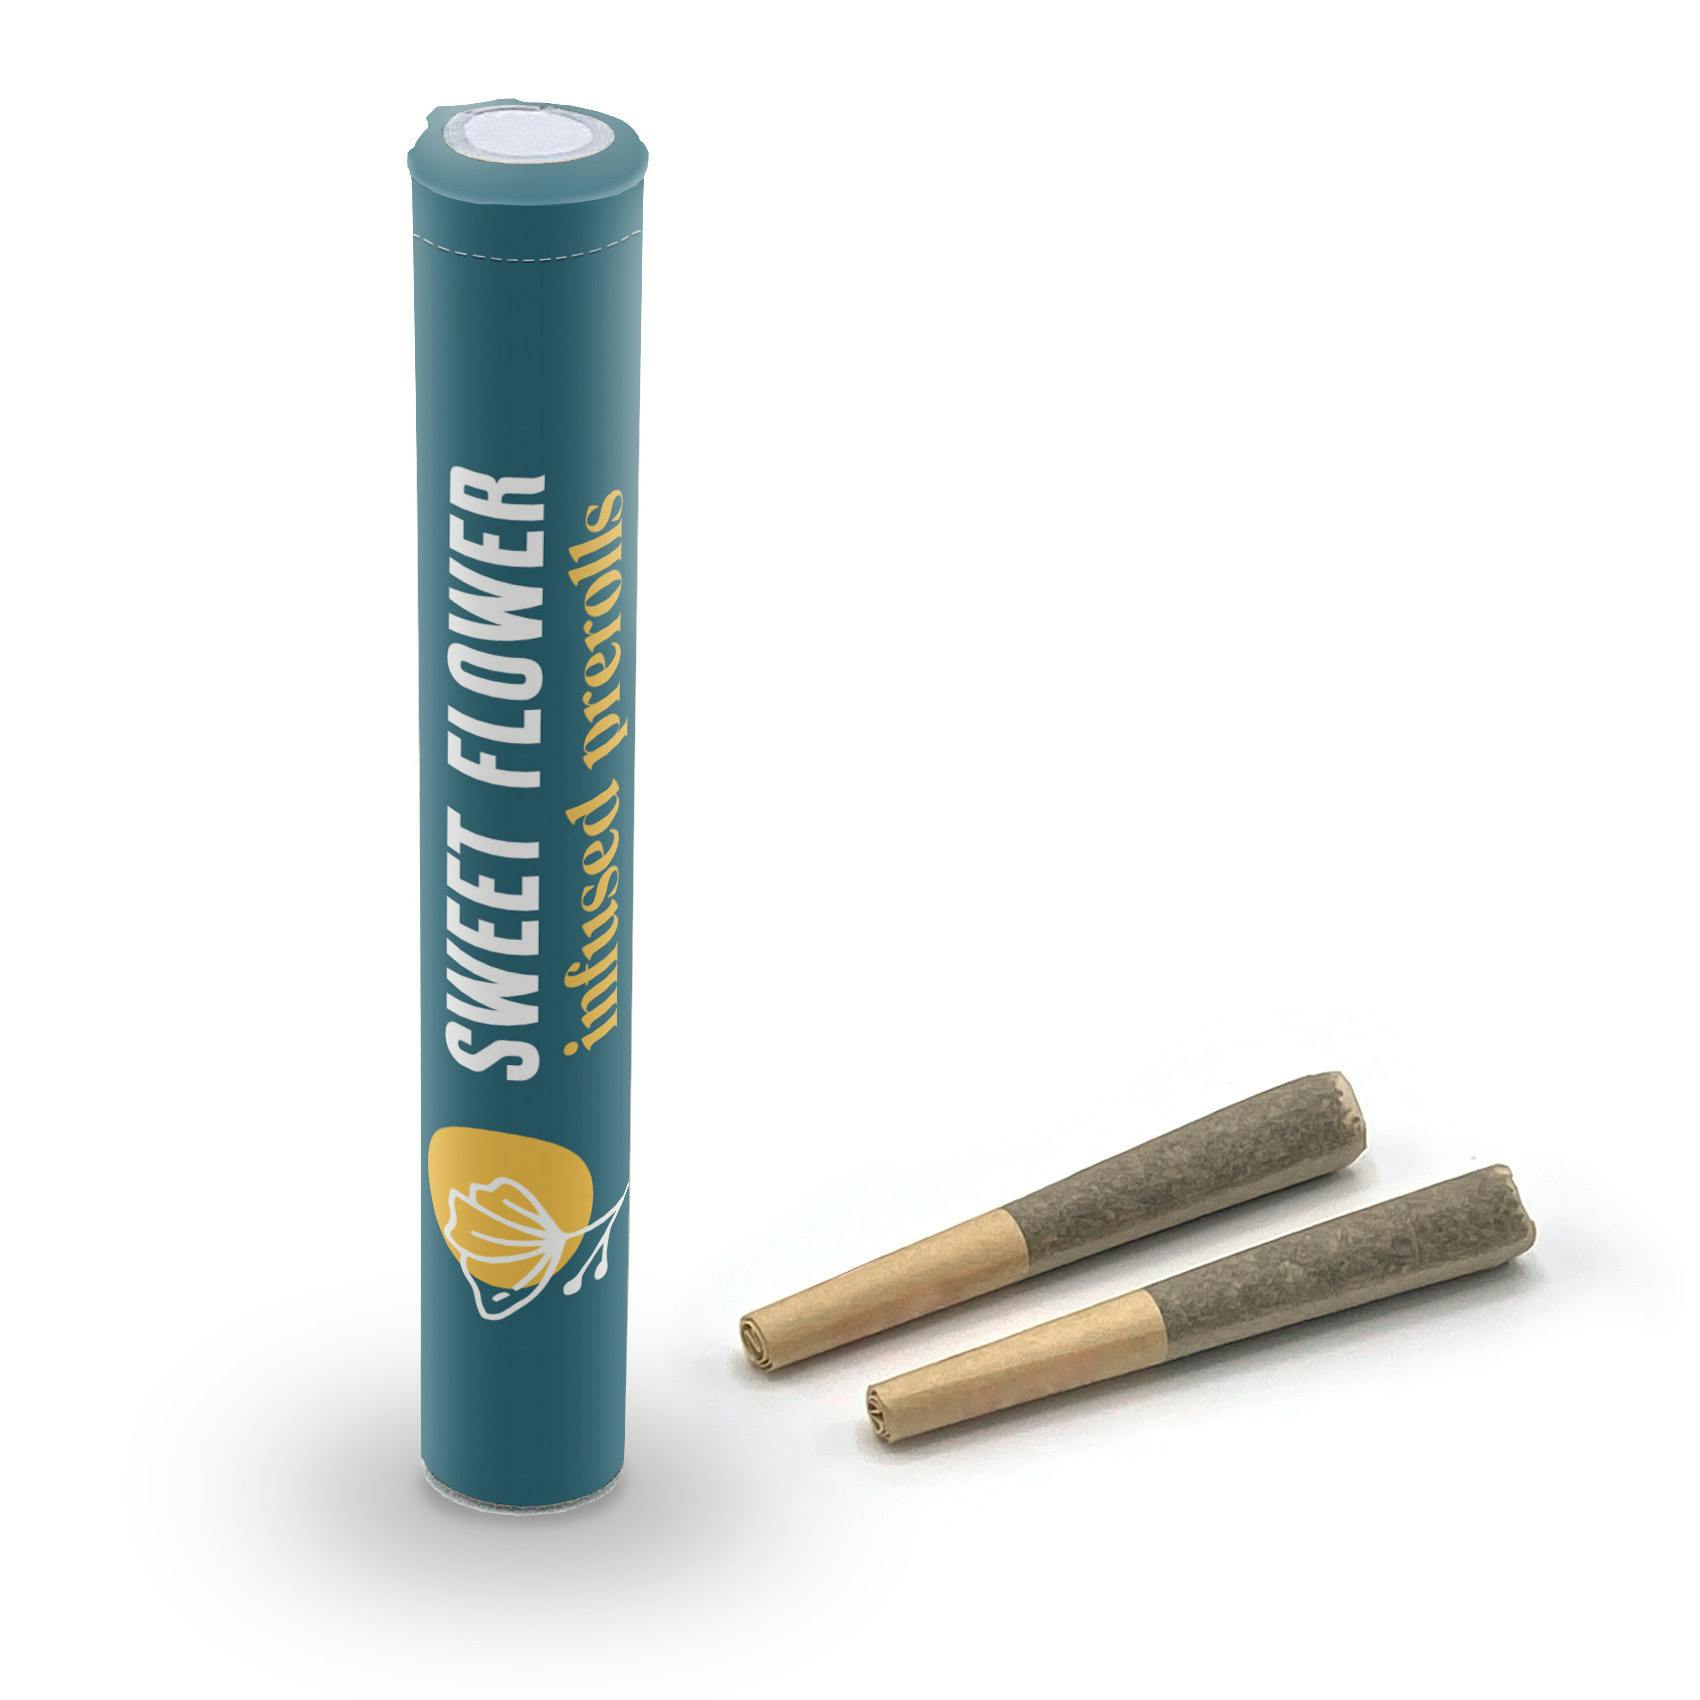 Durban Poison - Infused 2 pack Pre-roll (0.5g x 2)